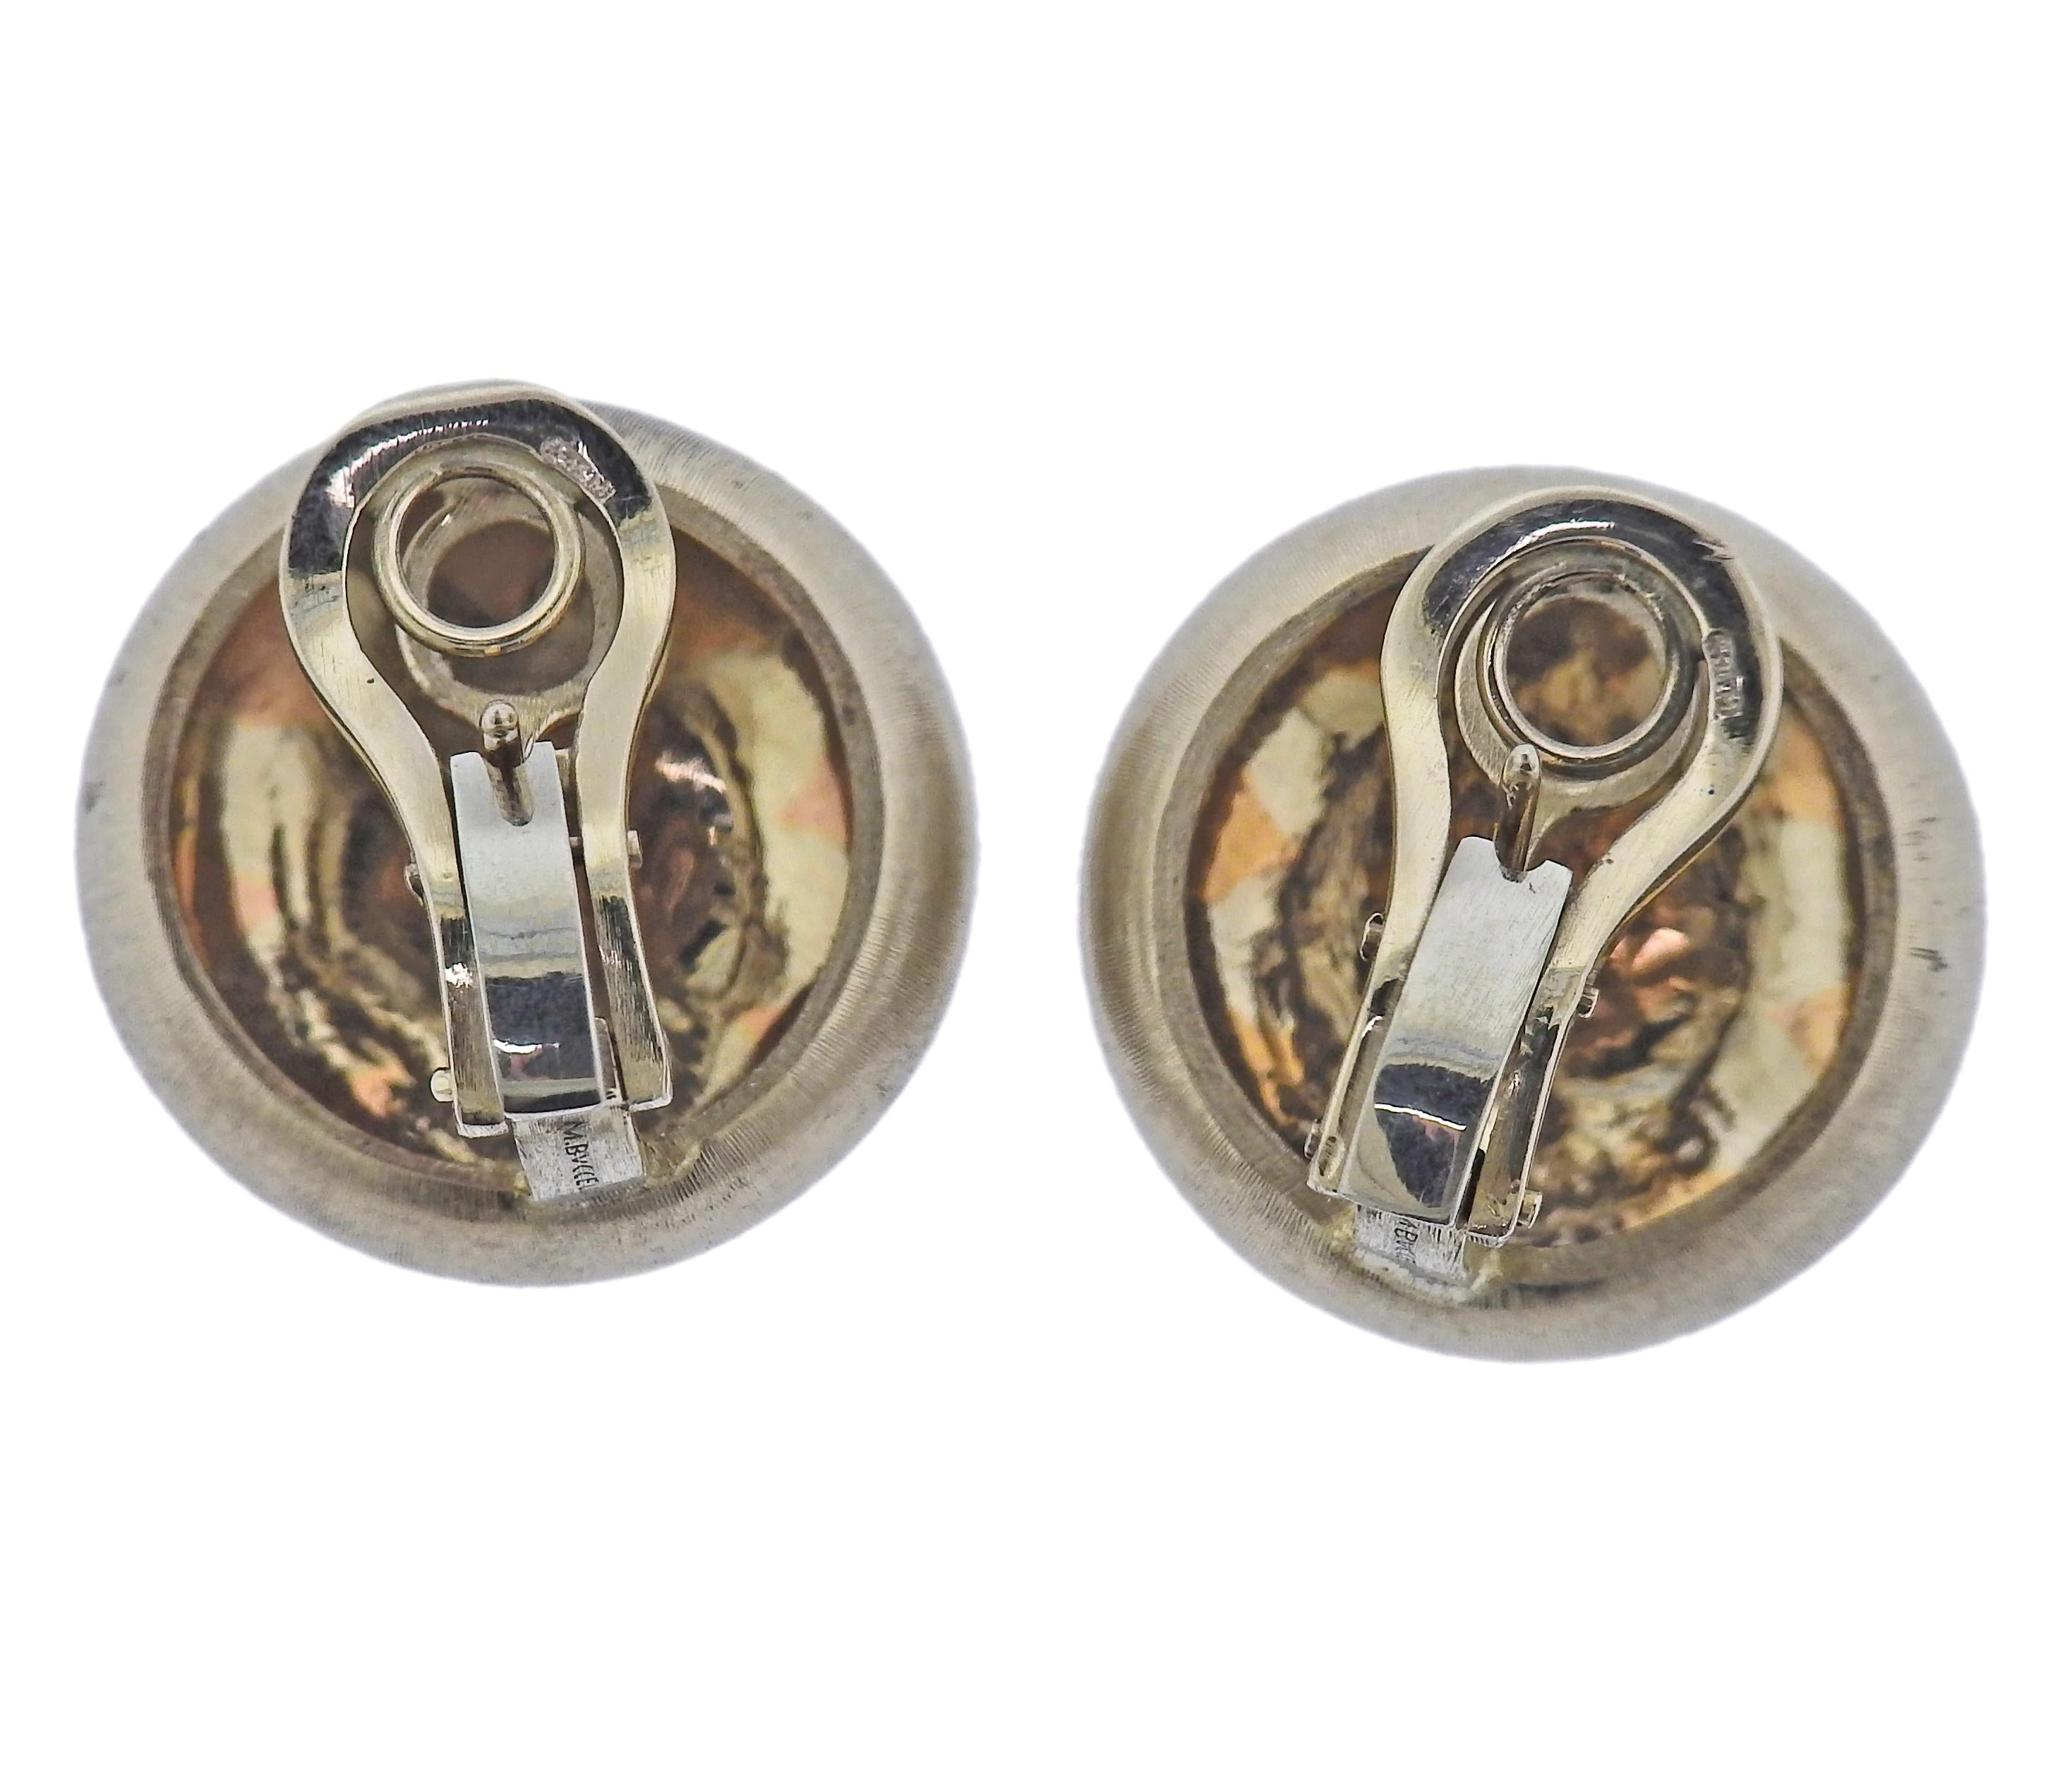 Pair of 18k white and rose gold button earrings by Buccellati. Earrings are 20mm in diameter. Weight - 20.5 grams. Marked: Buccellati, 750, *15Mi. 